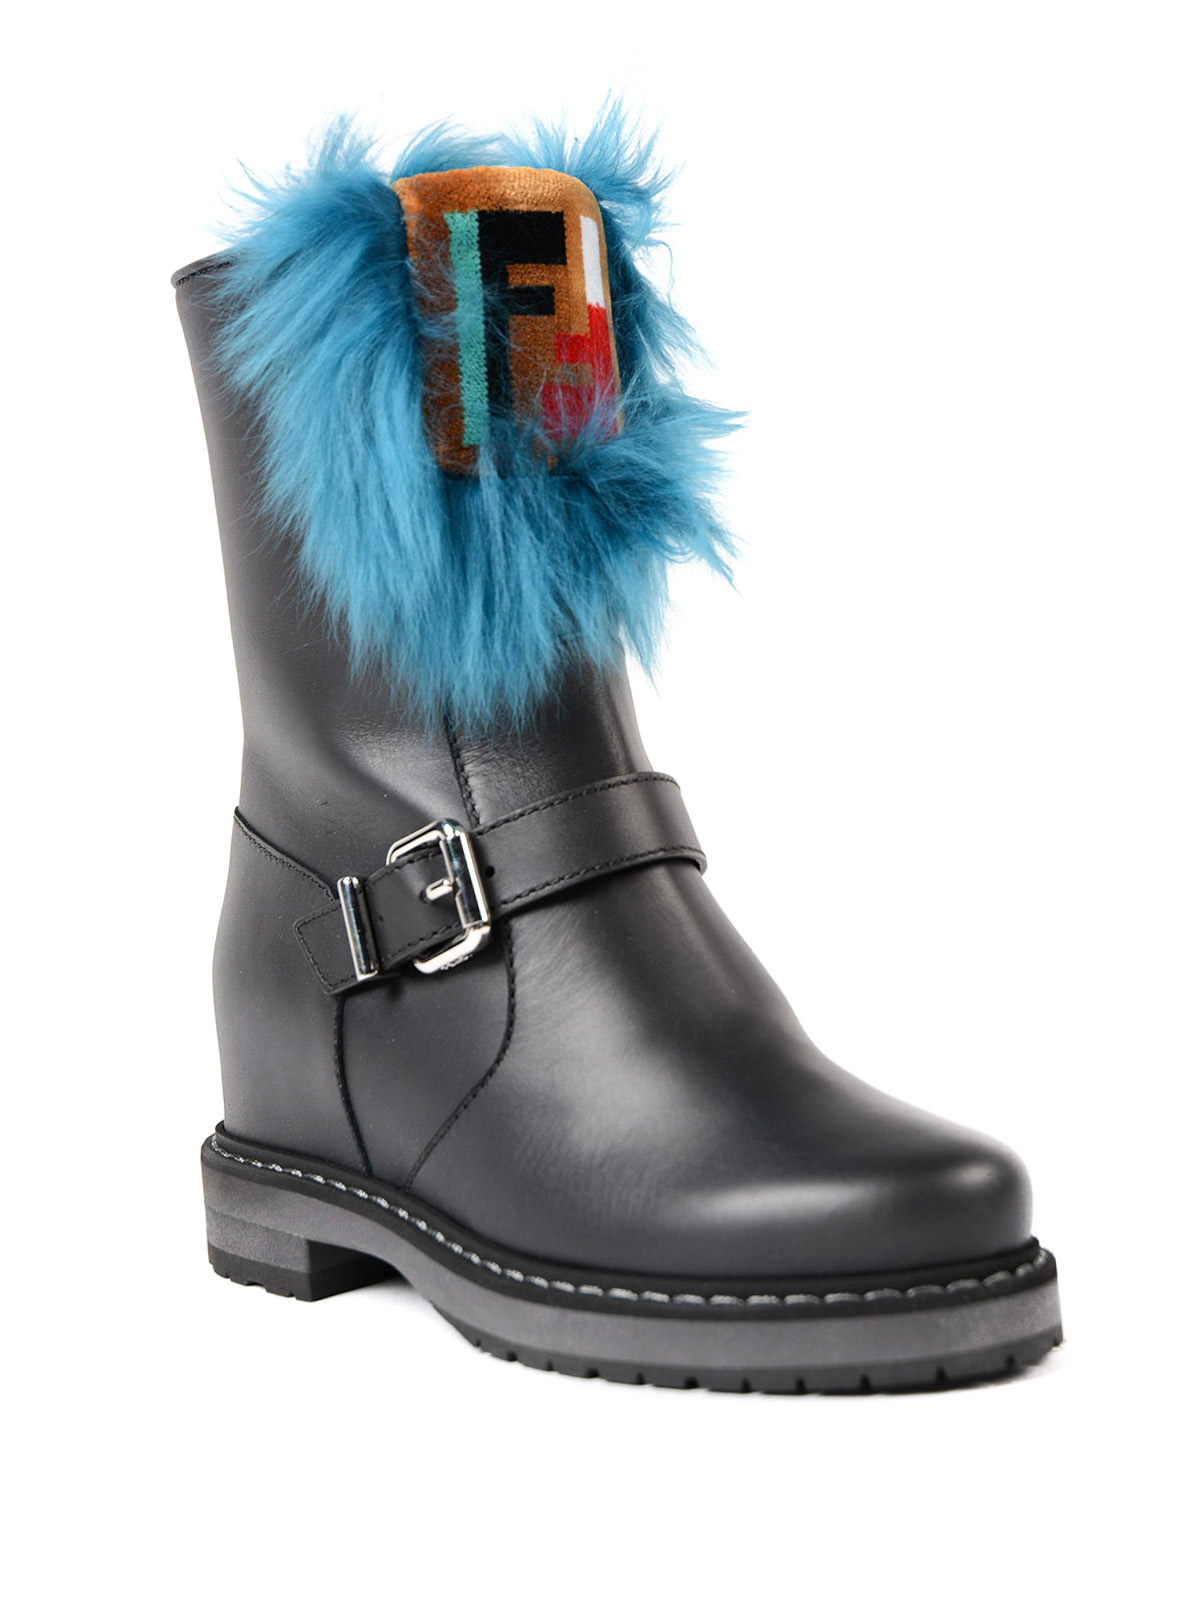 Fur insert concealed wedge boots 